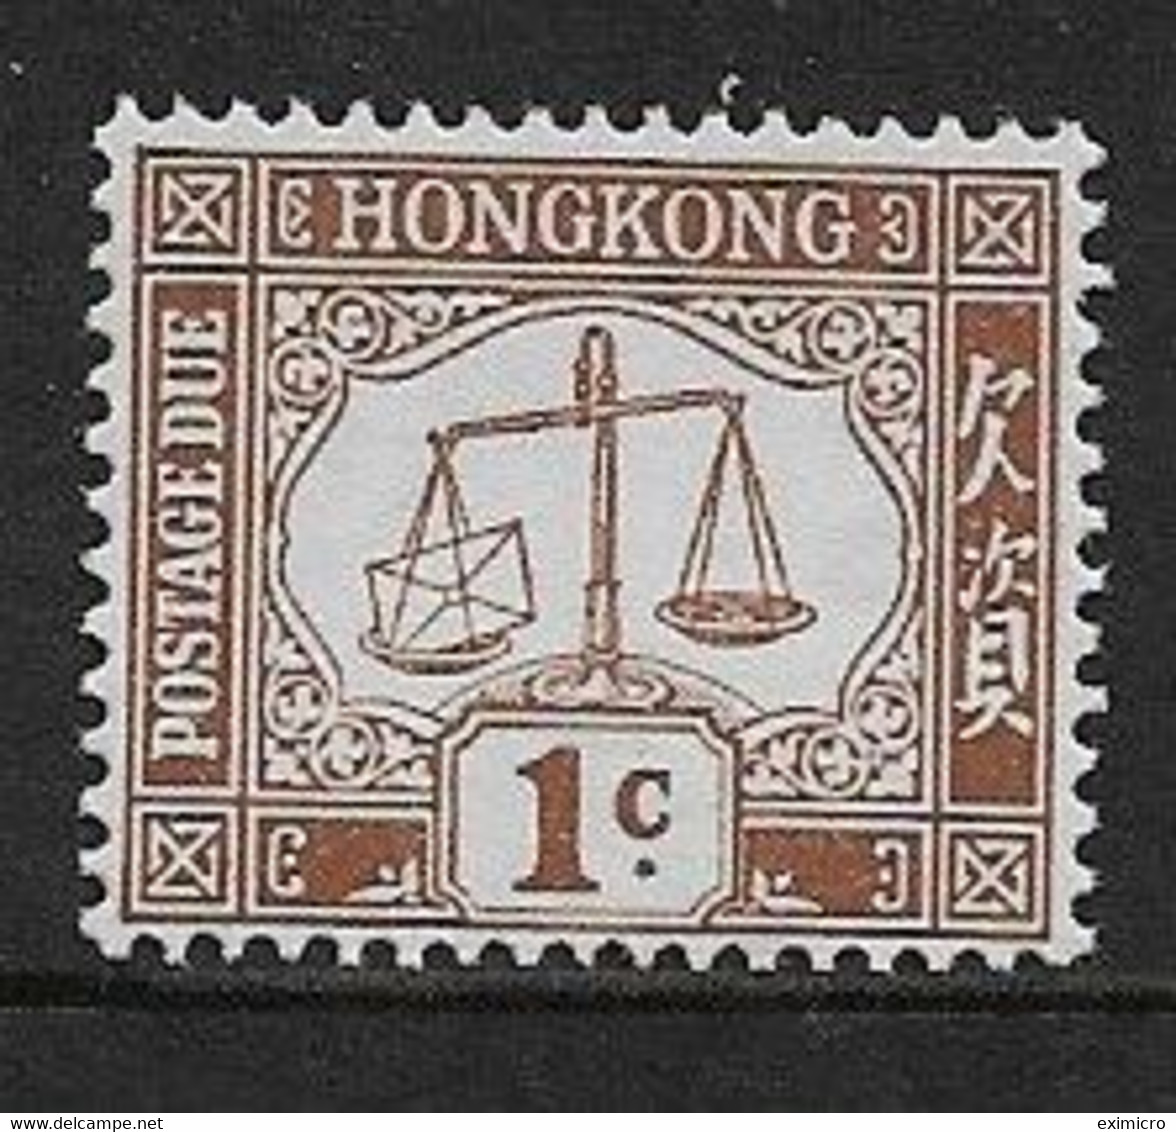 HONG KONG 1923 1c POSTAGE DUE SG D1a LIGHTLY MOUNTED MINT - Timbres-taxe